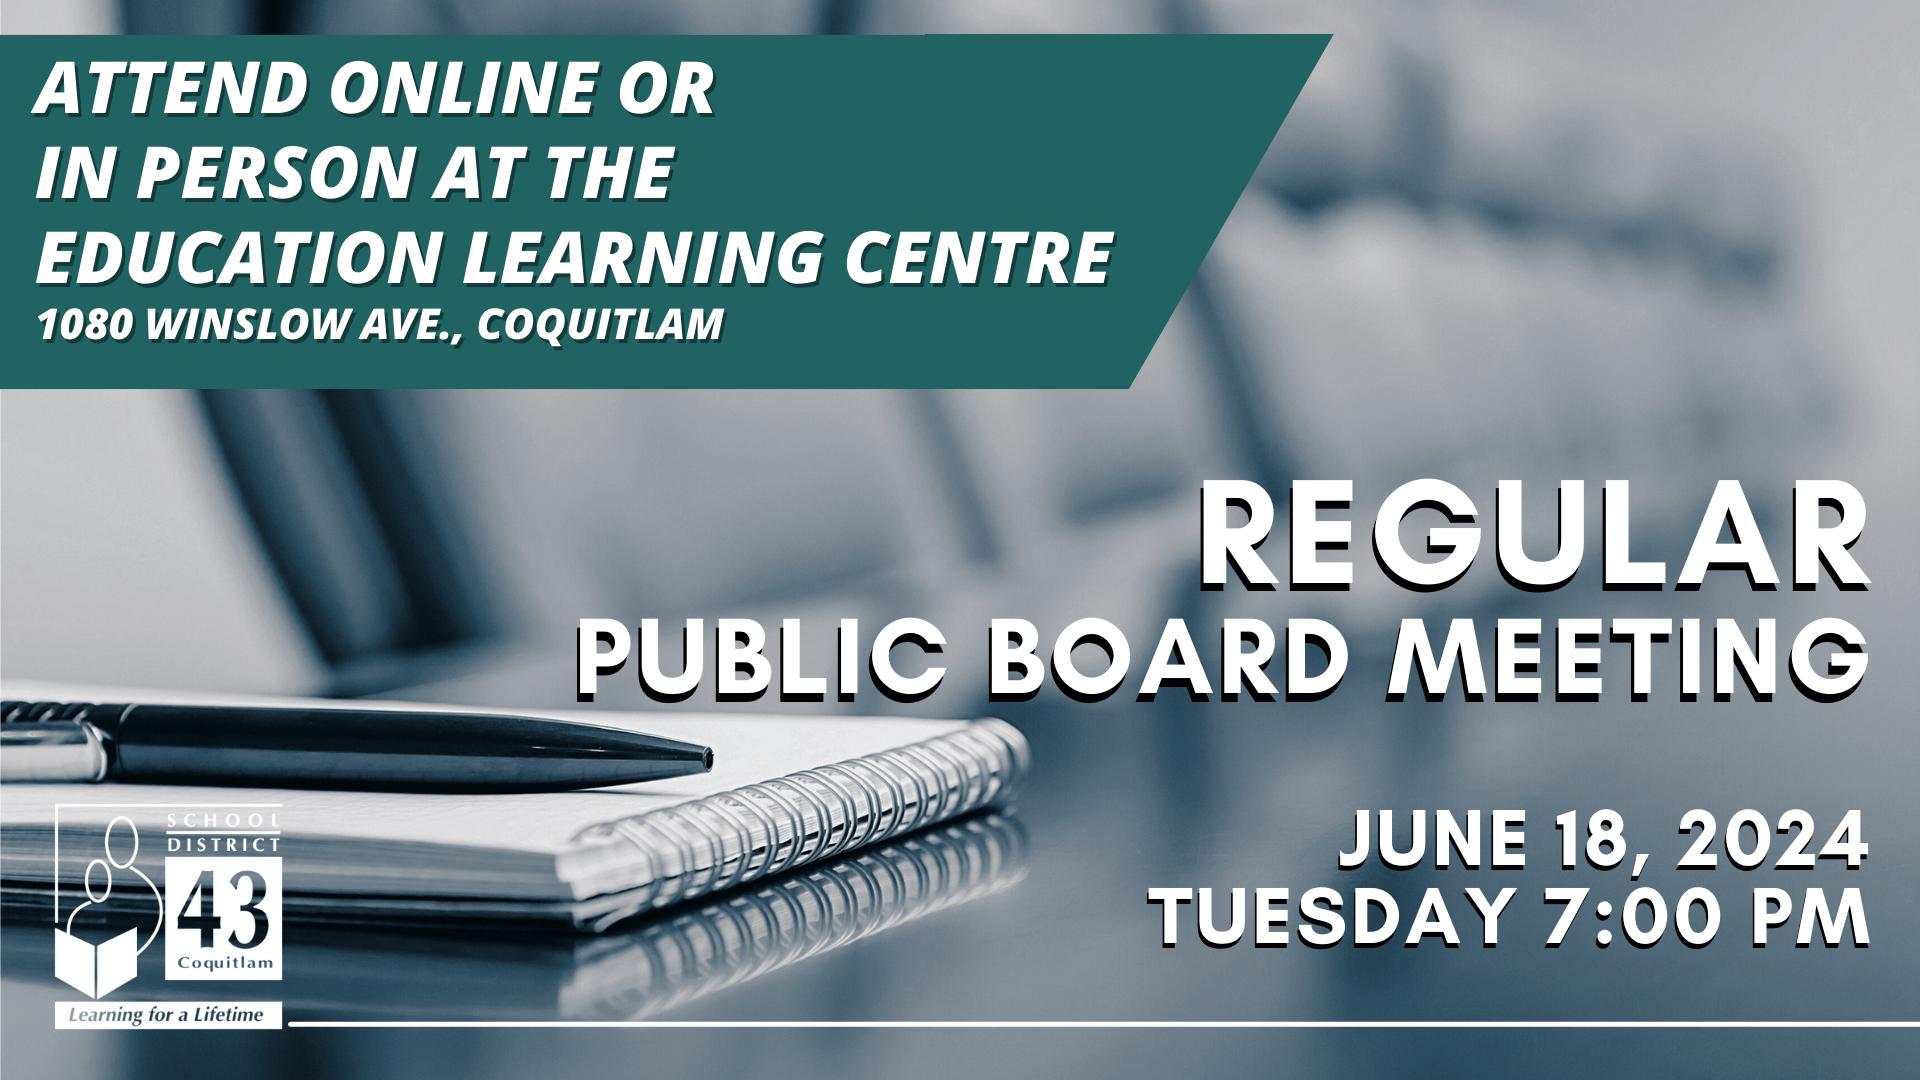 Attend the Regular Public Board Meeting on June 18 at 7pm